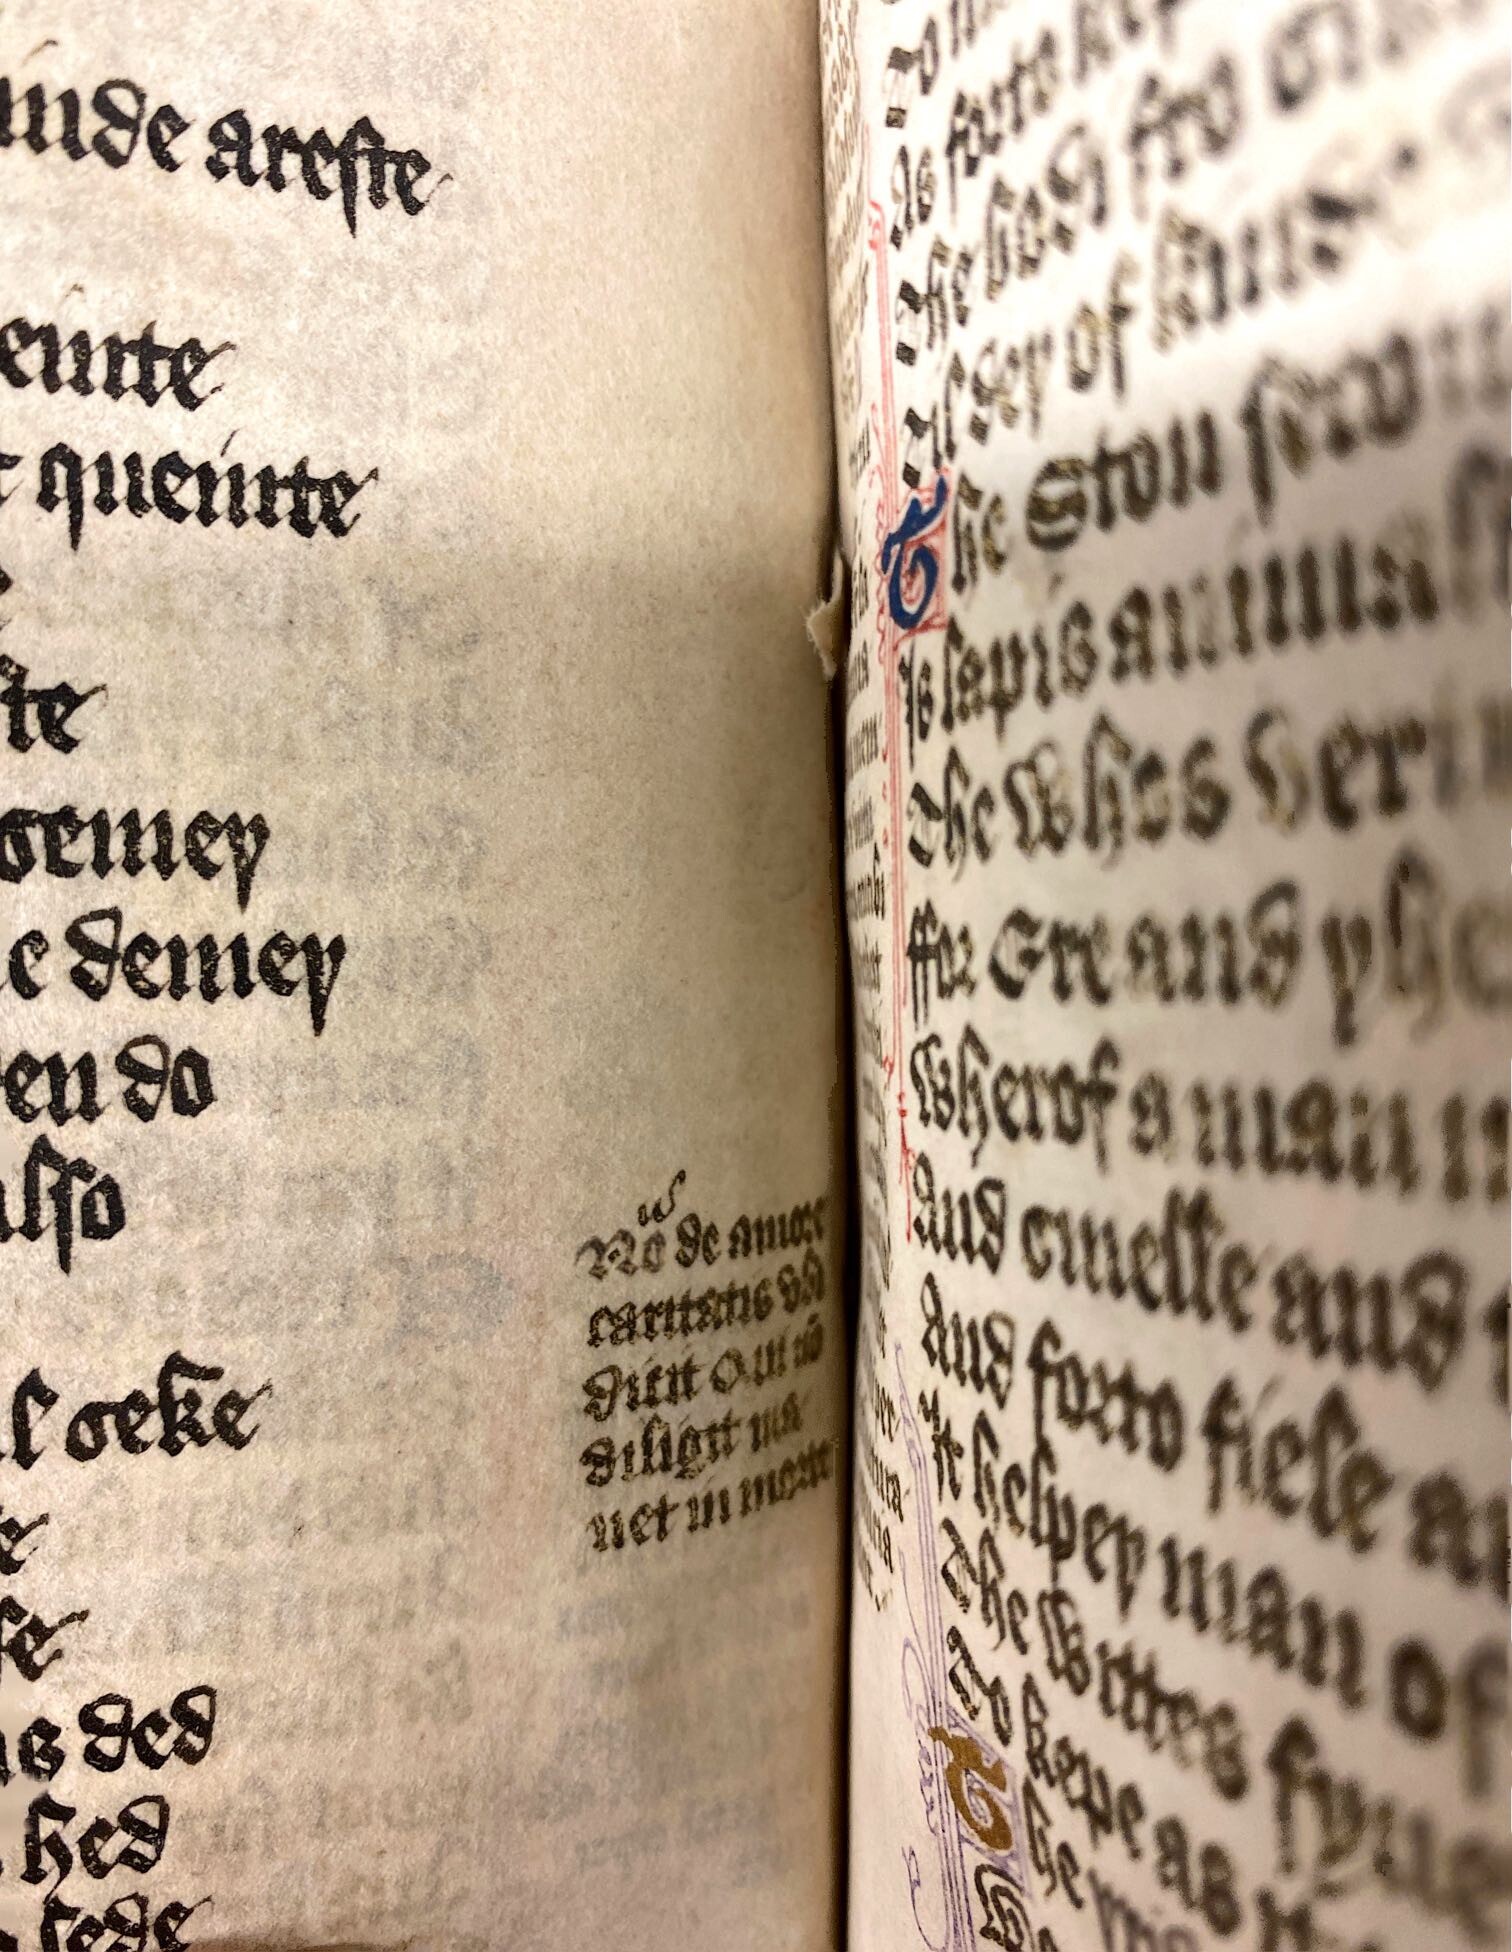 An image of the gutter between two manuscript leaves, each featuring black text in Middle English.